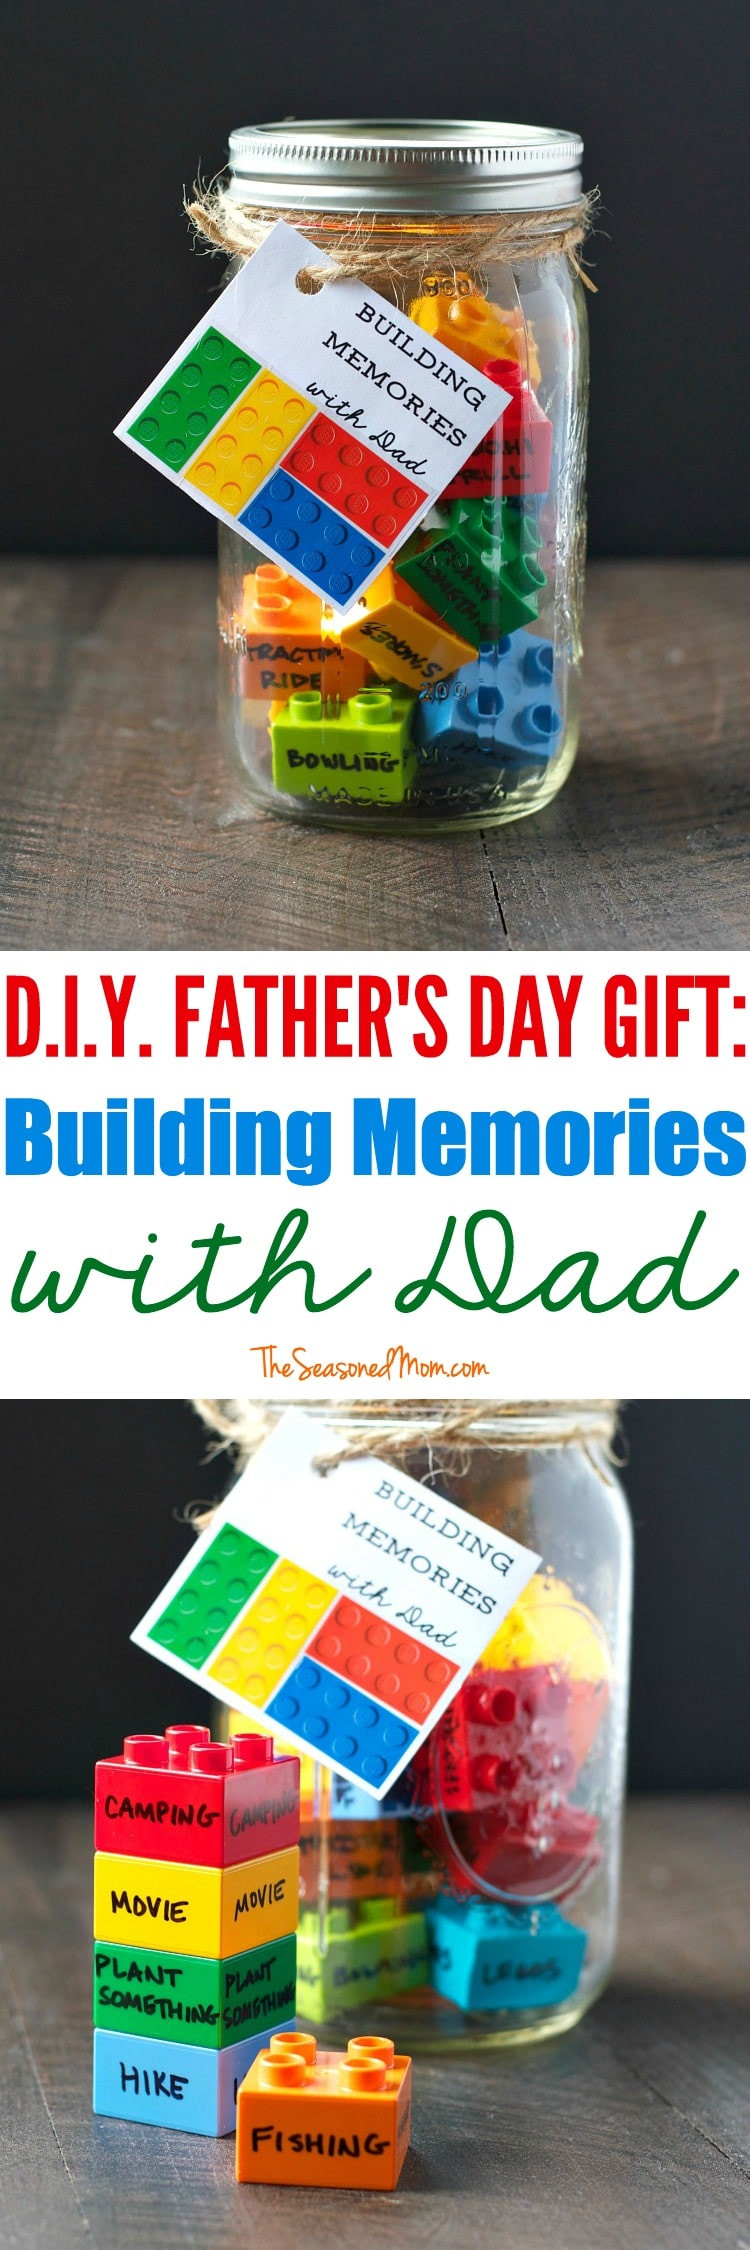 Fathers Day Handmade Gift Ideas
 25 Homemade Father s Day Gifts from Kids That Dad Can